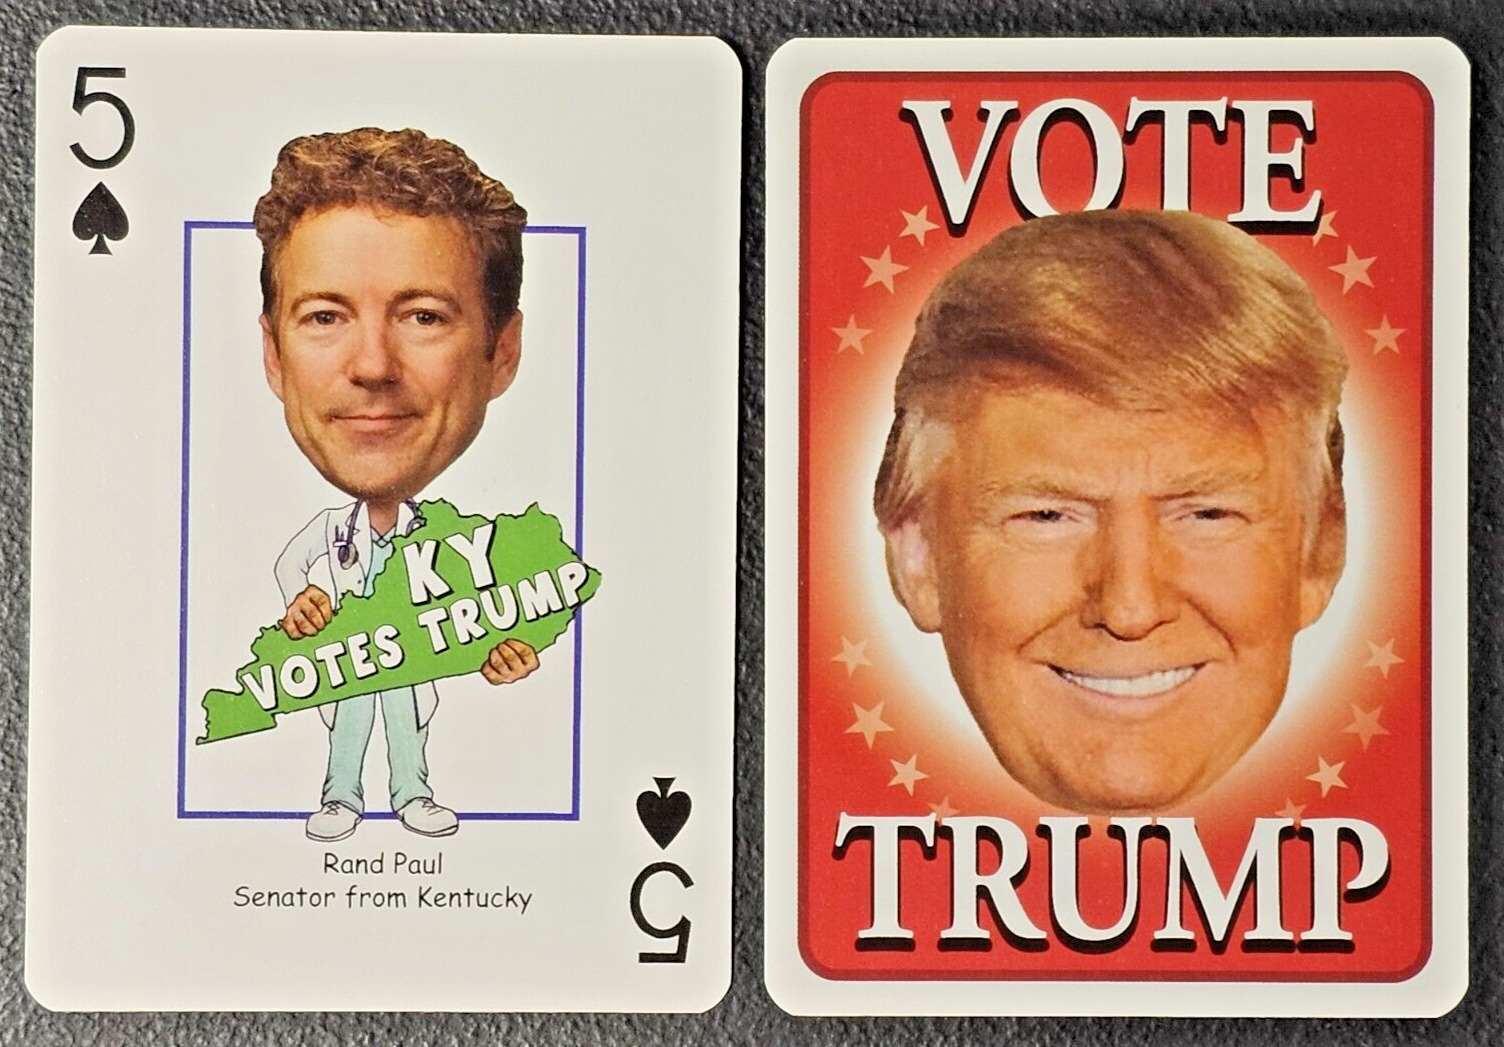 Rand Paul Kentucky Hero Deck 5 of Spades - Vote Trump for President Playing Card